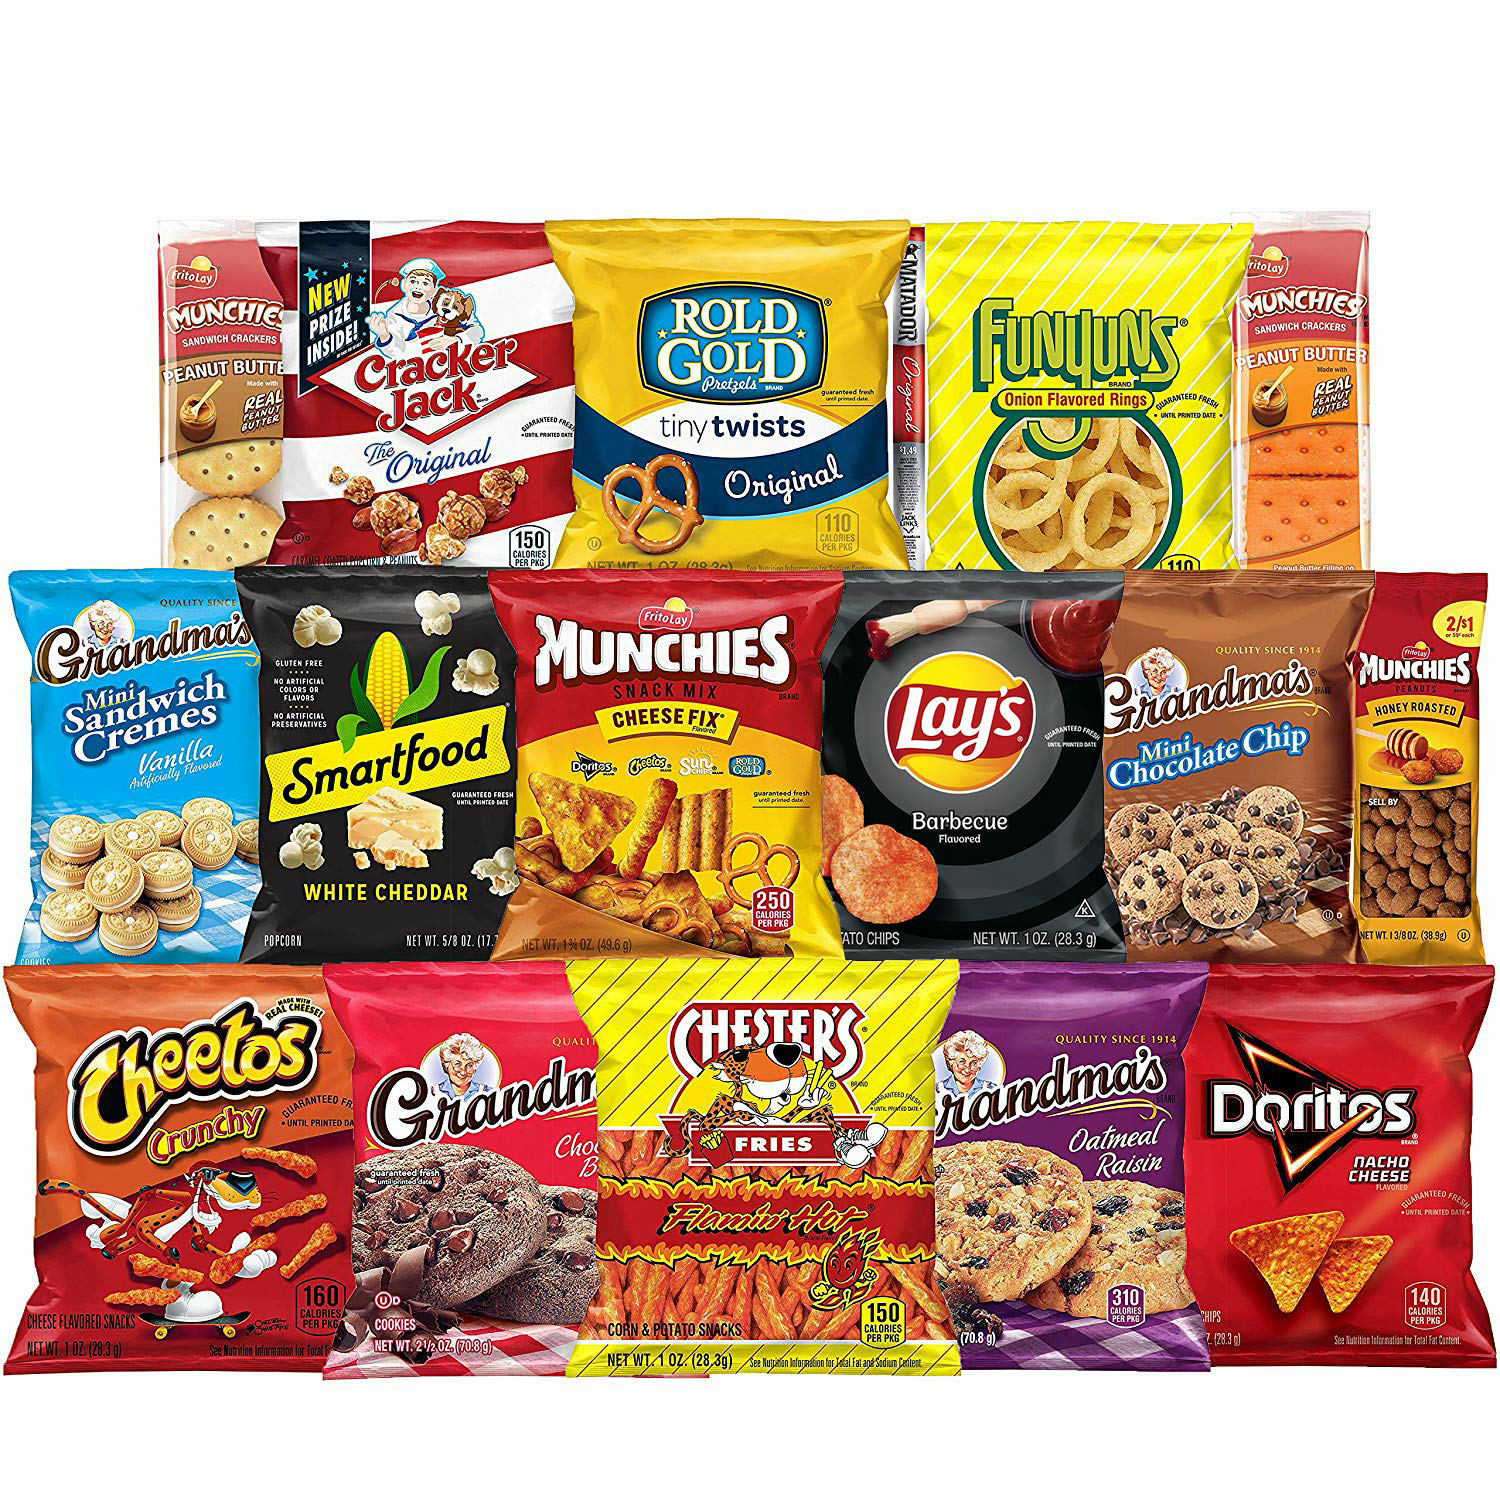 Amazon.com : Frito-Lay Ultimate Snack Care Package, Variety Assortment of Chips, Cookies, Crackers & More, 40 Count : Grocery & Gourmet Food $14.98